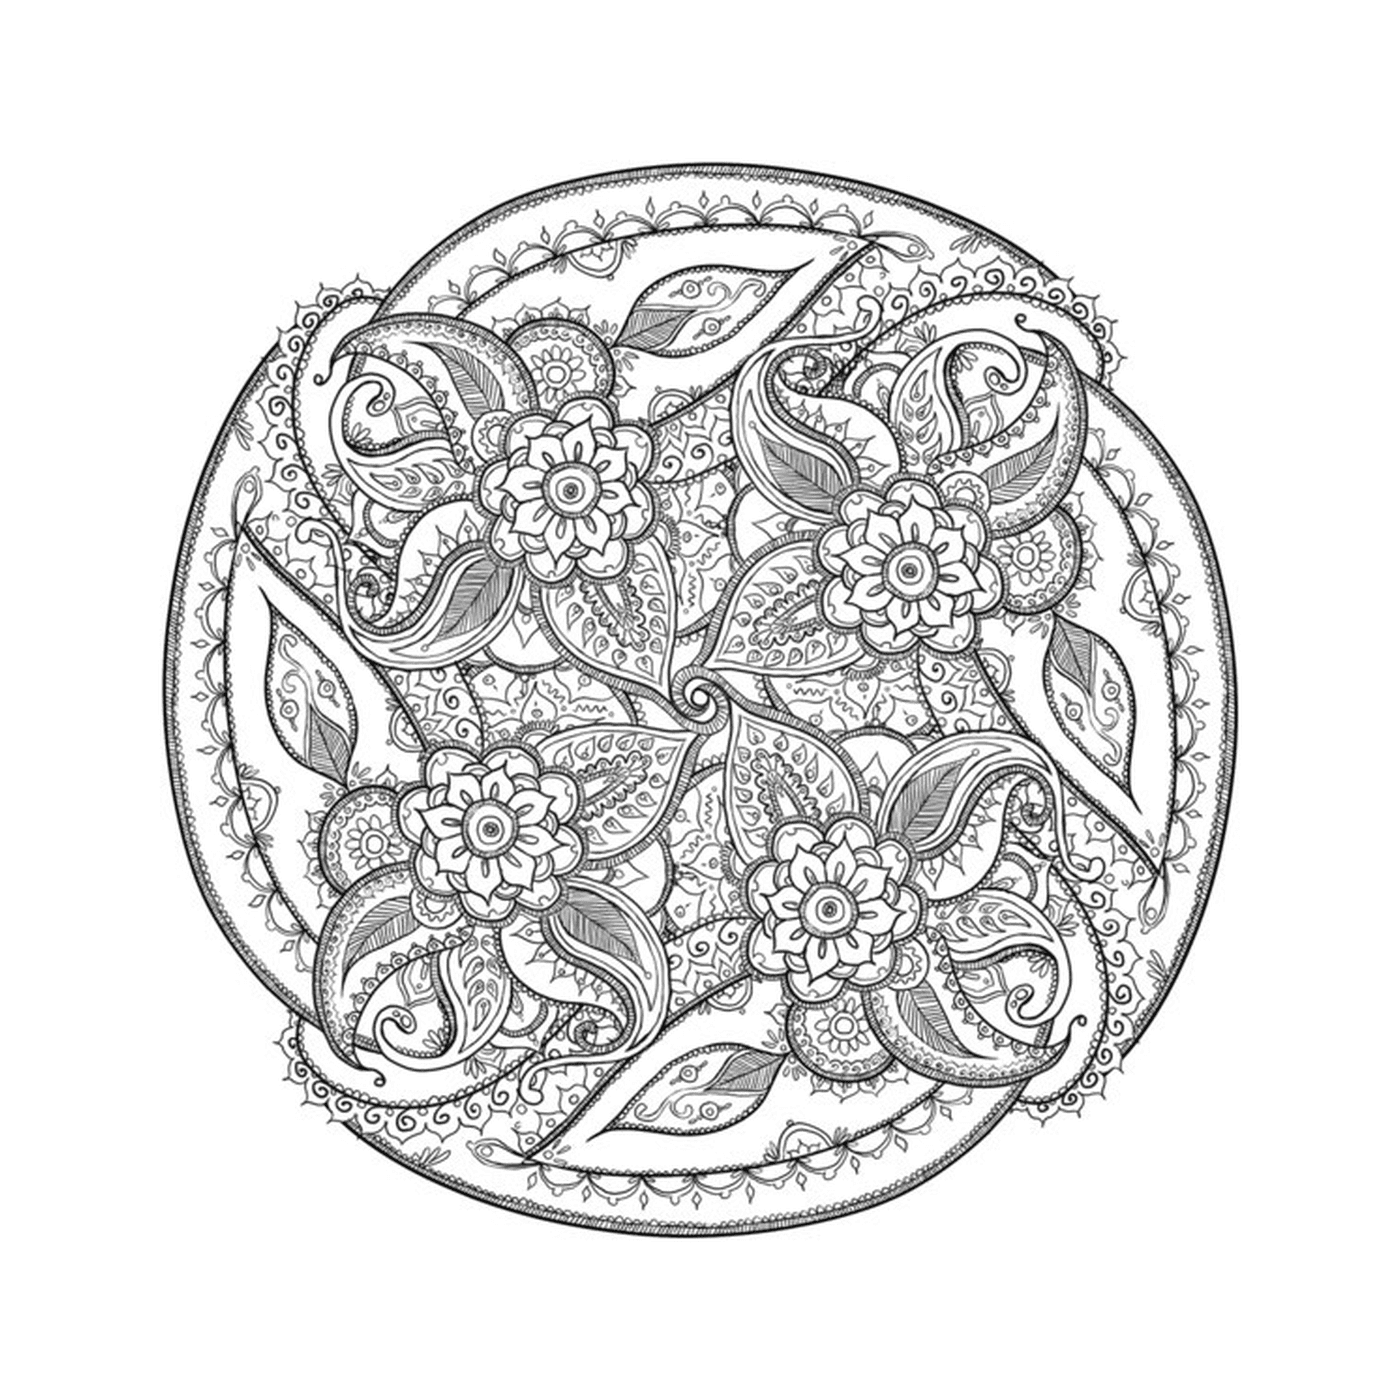  a complex circular pattern with flowers 